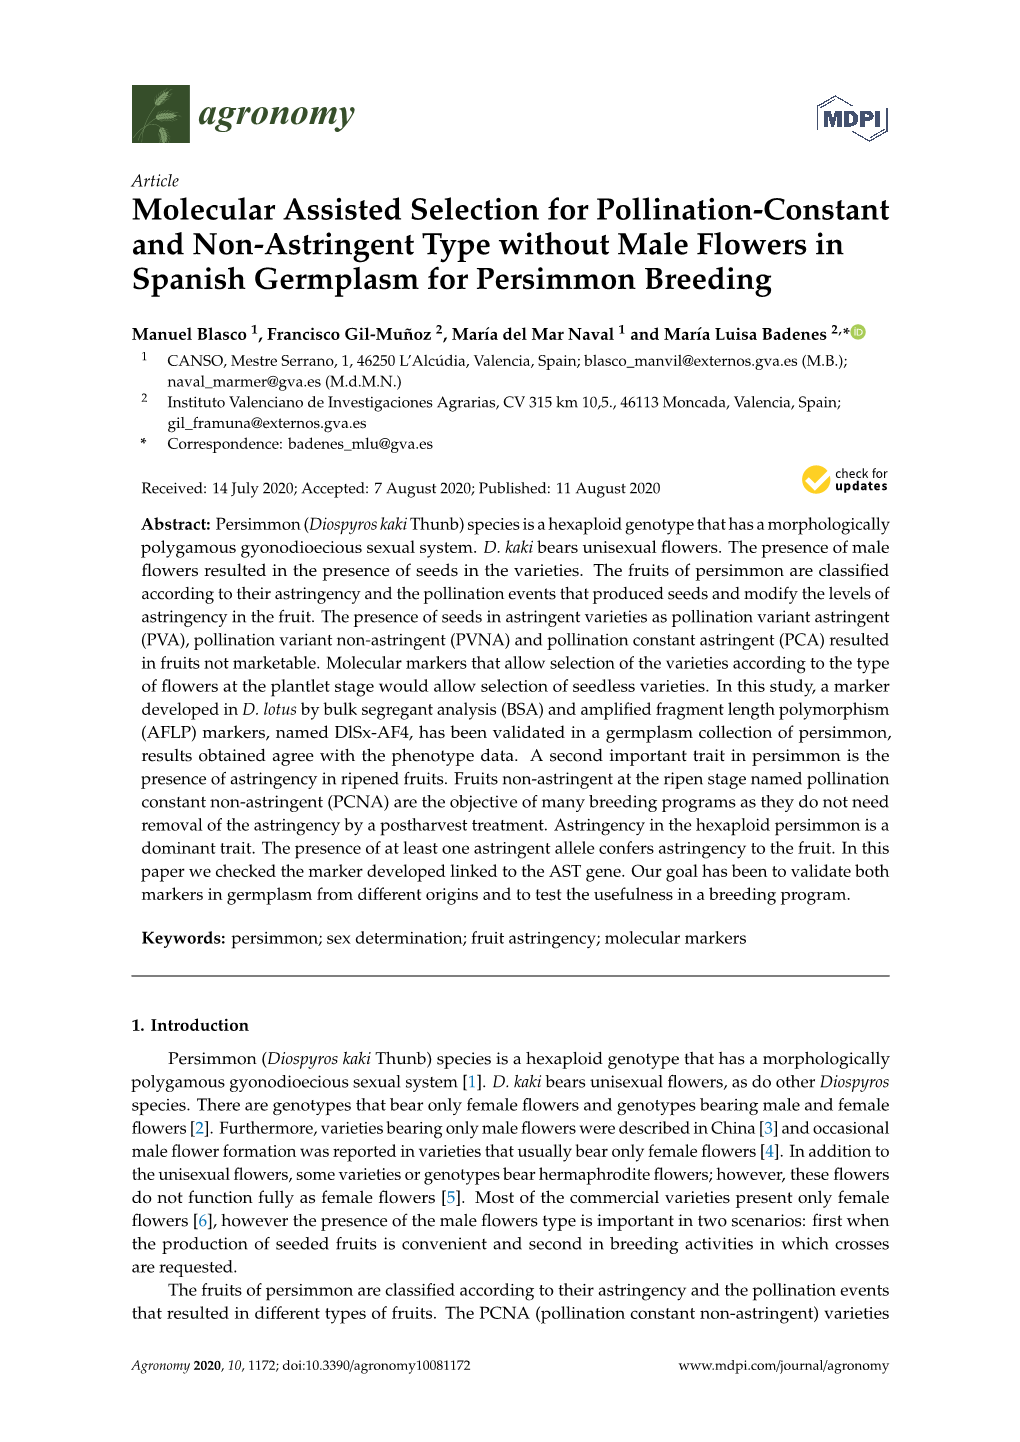 Molecular Assisted Selection for Pollination-Constant and Non-Astringent Type Without Male Flowers in Spanish Germplasm for Persimmon Breeding